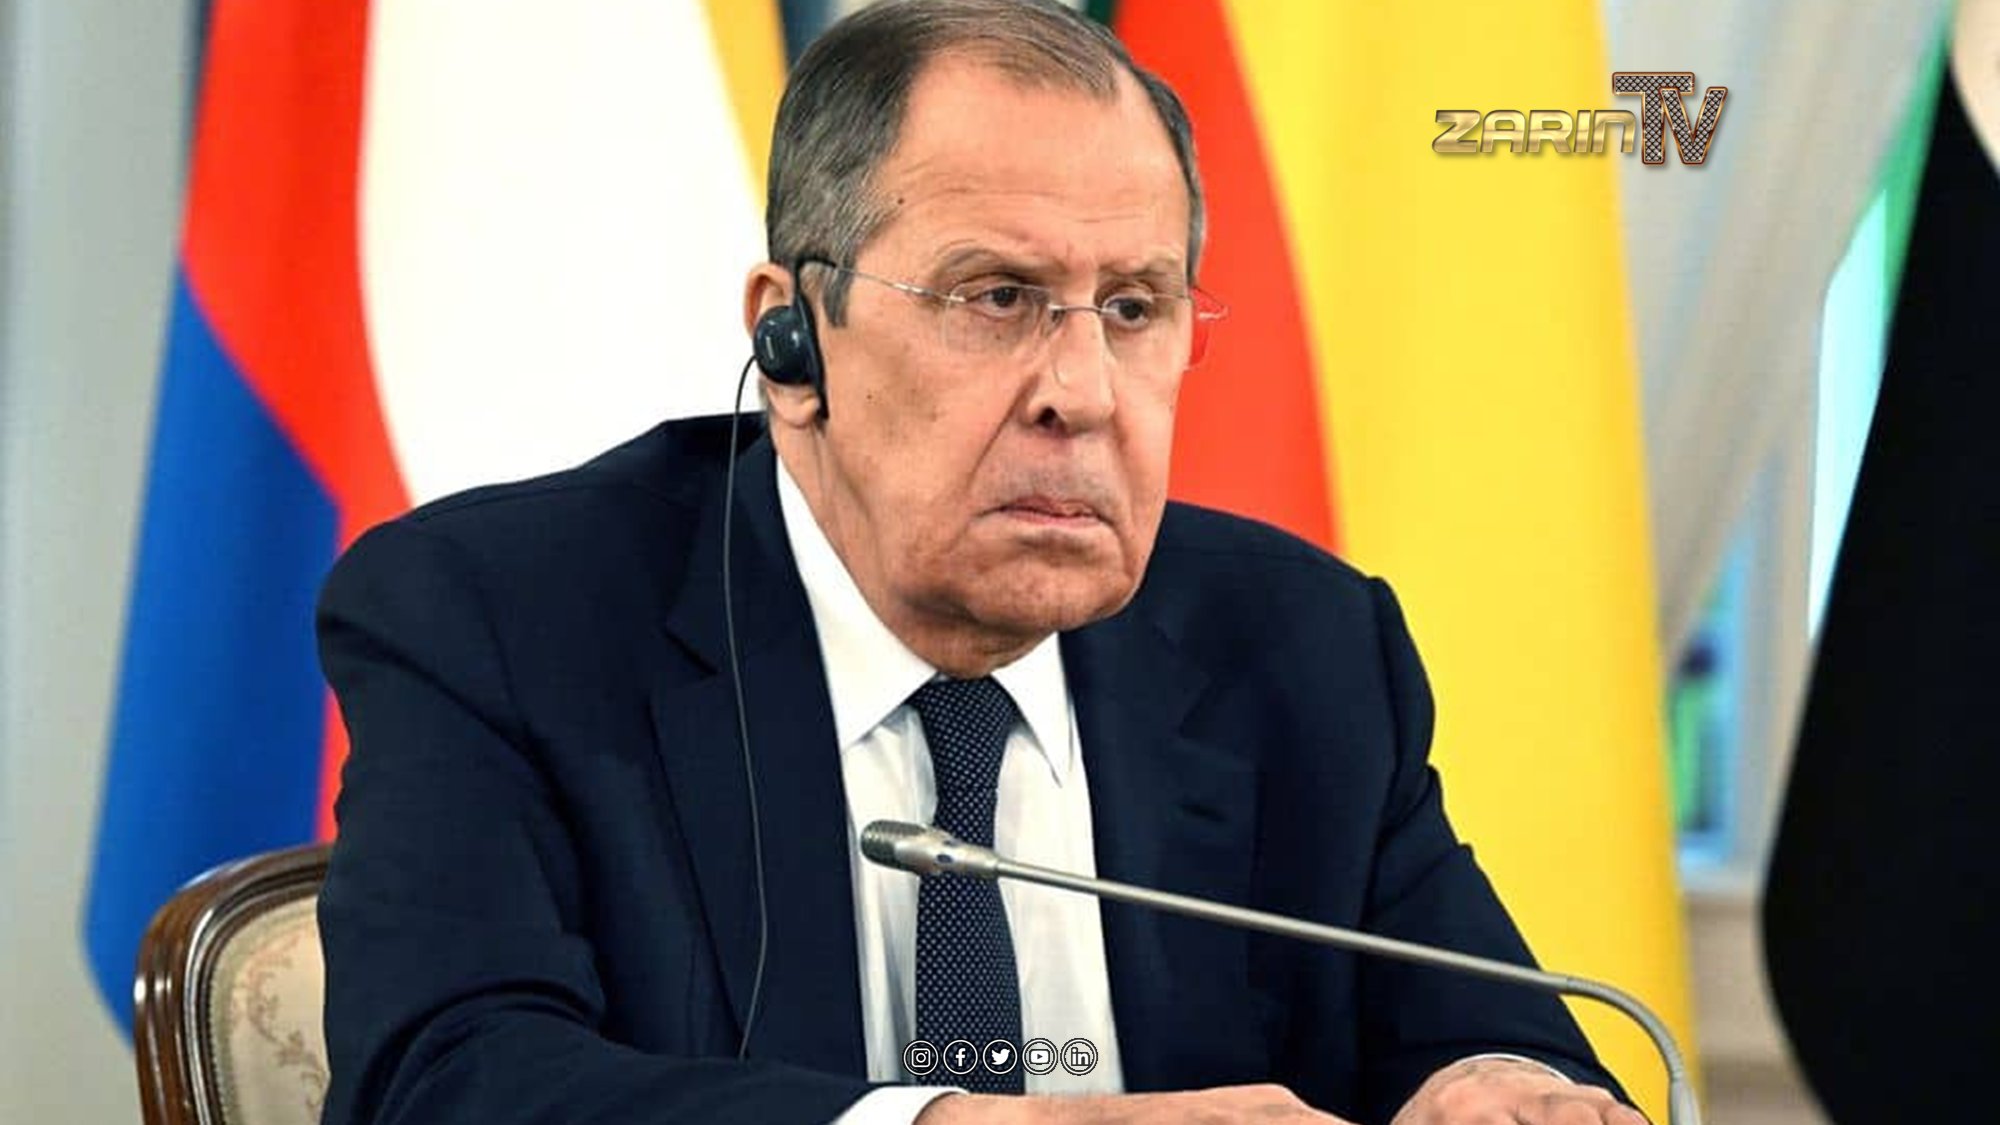 Lavrov: America has not made any serious proposals for nuclear talks